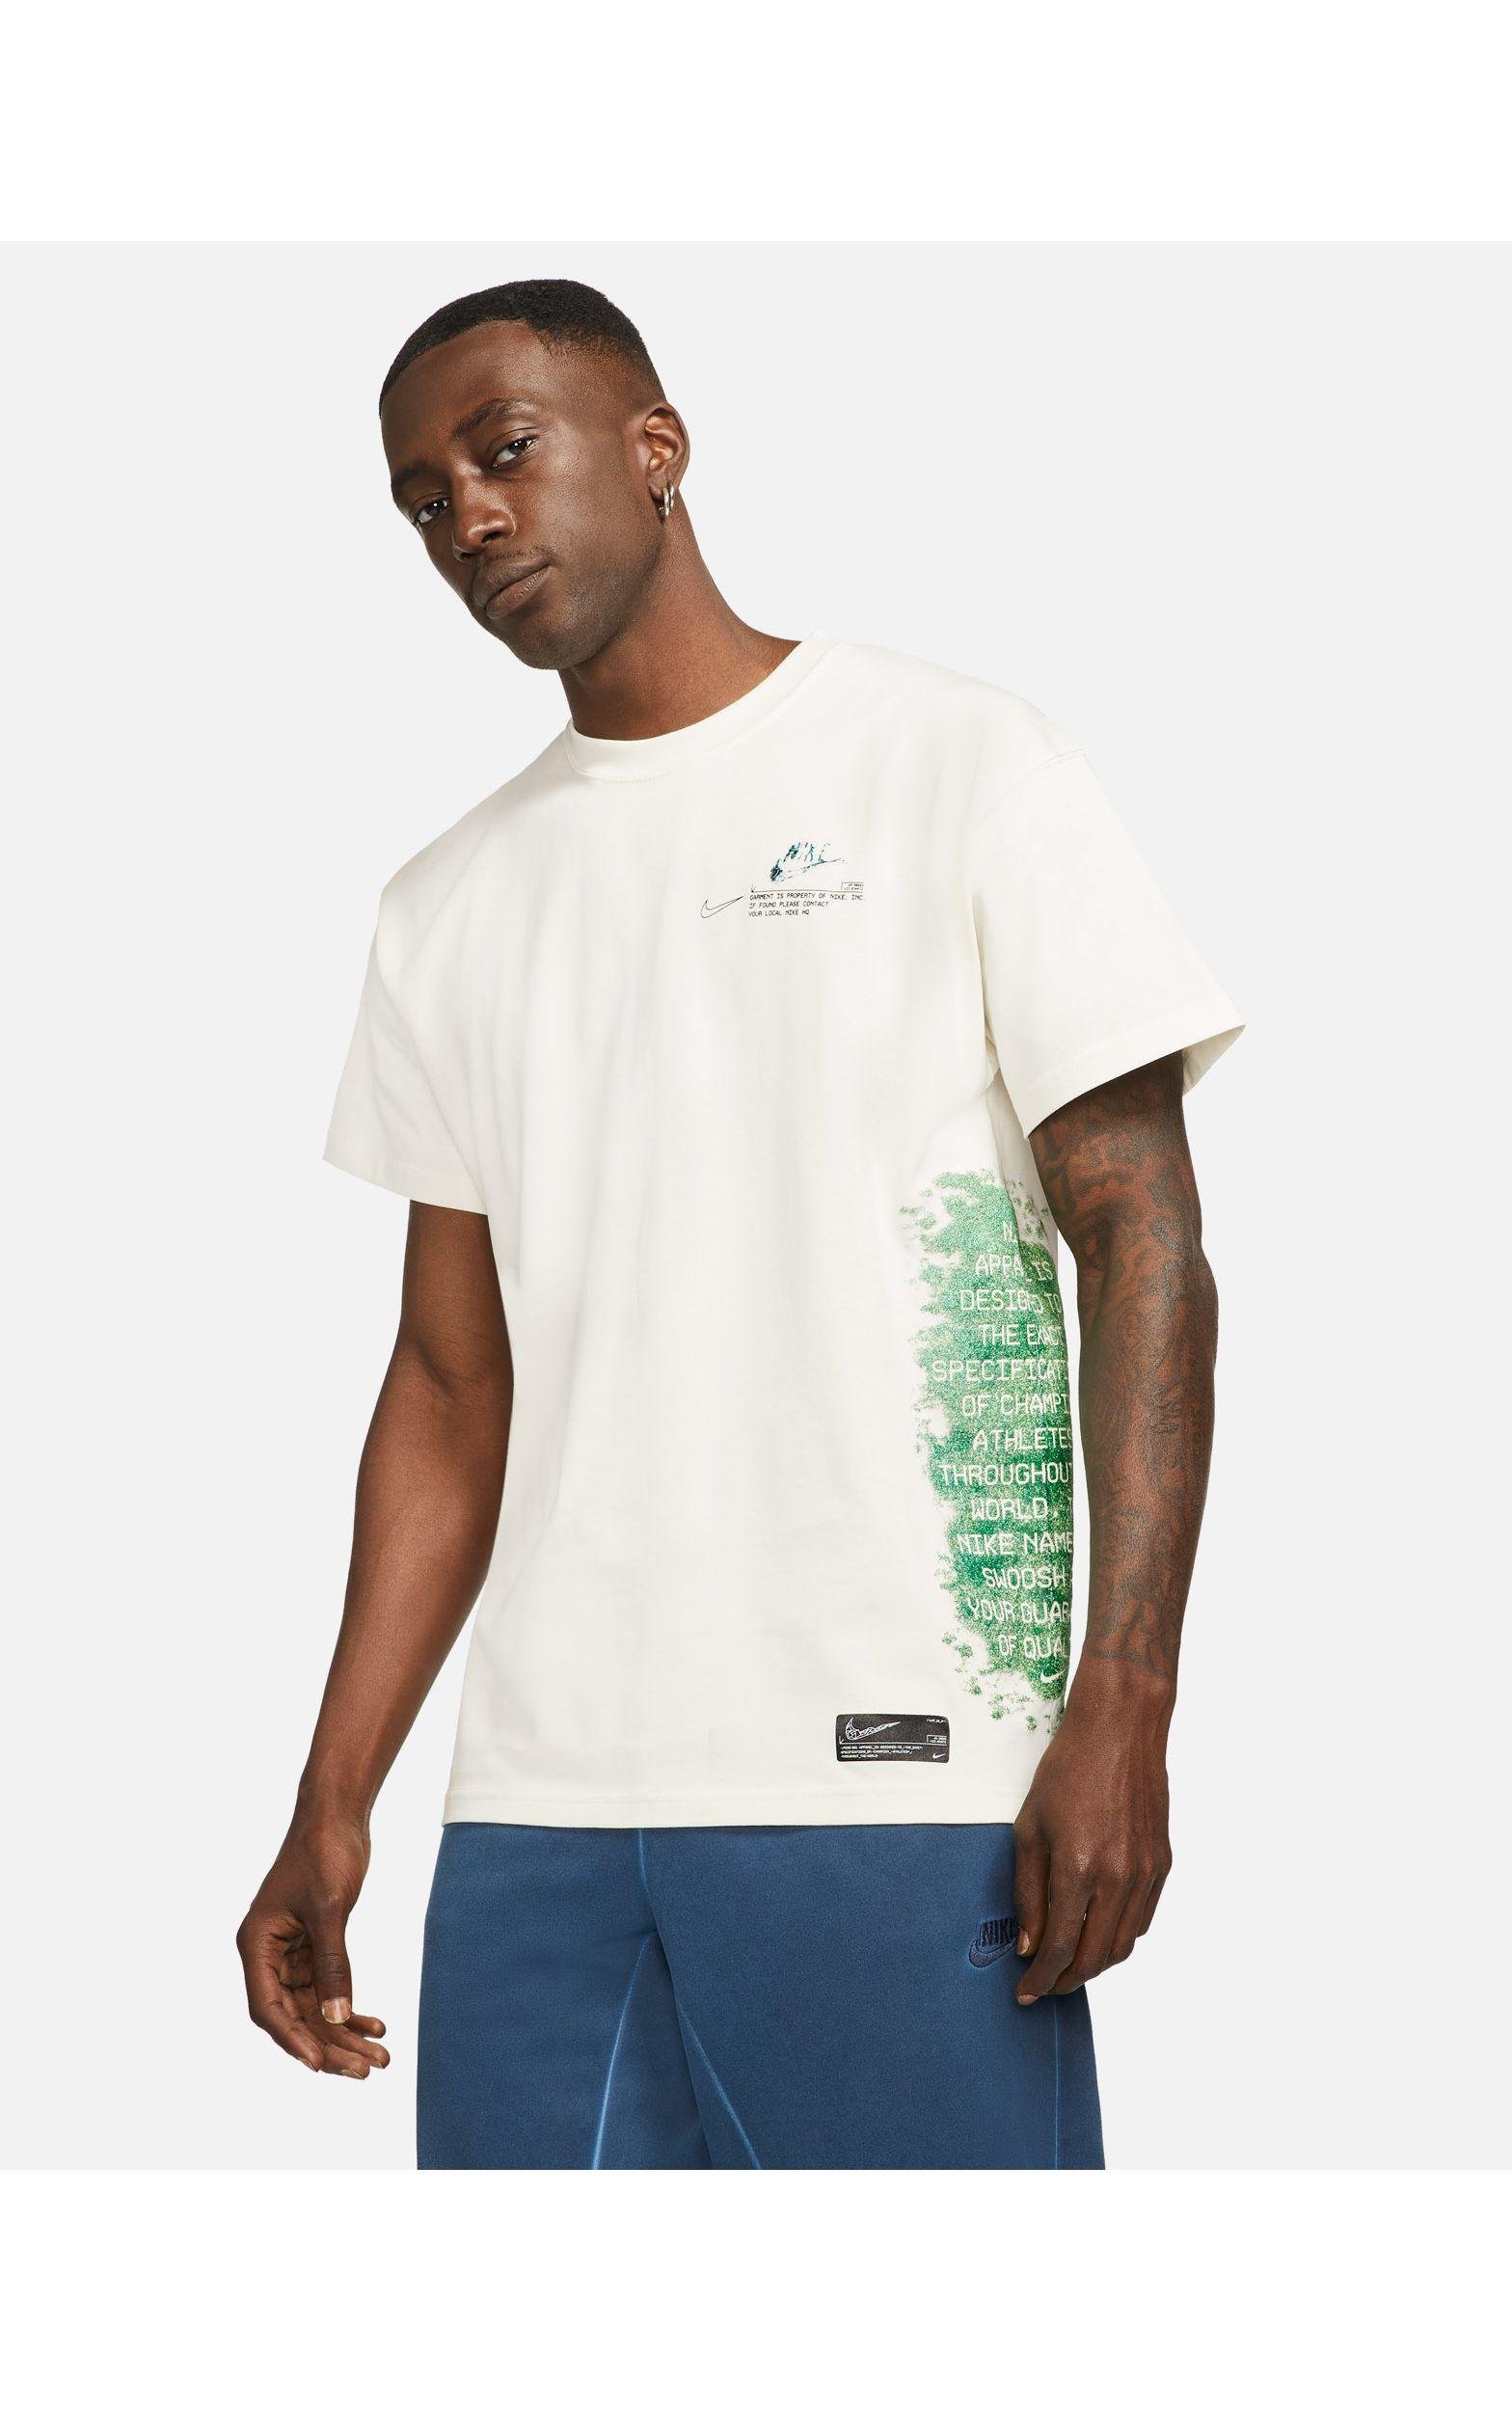 Nike Archaeo Swoosh Pack Graphic All Over Print T-shirt in White for Men